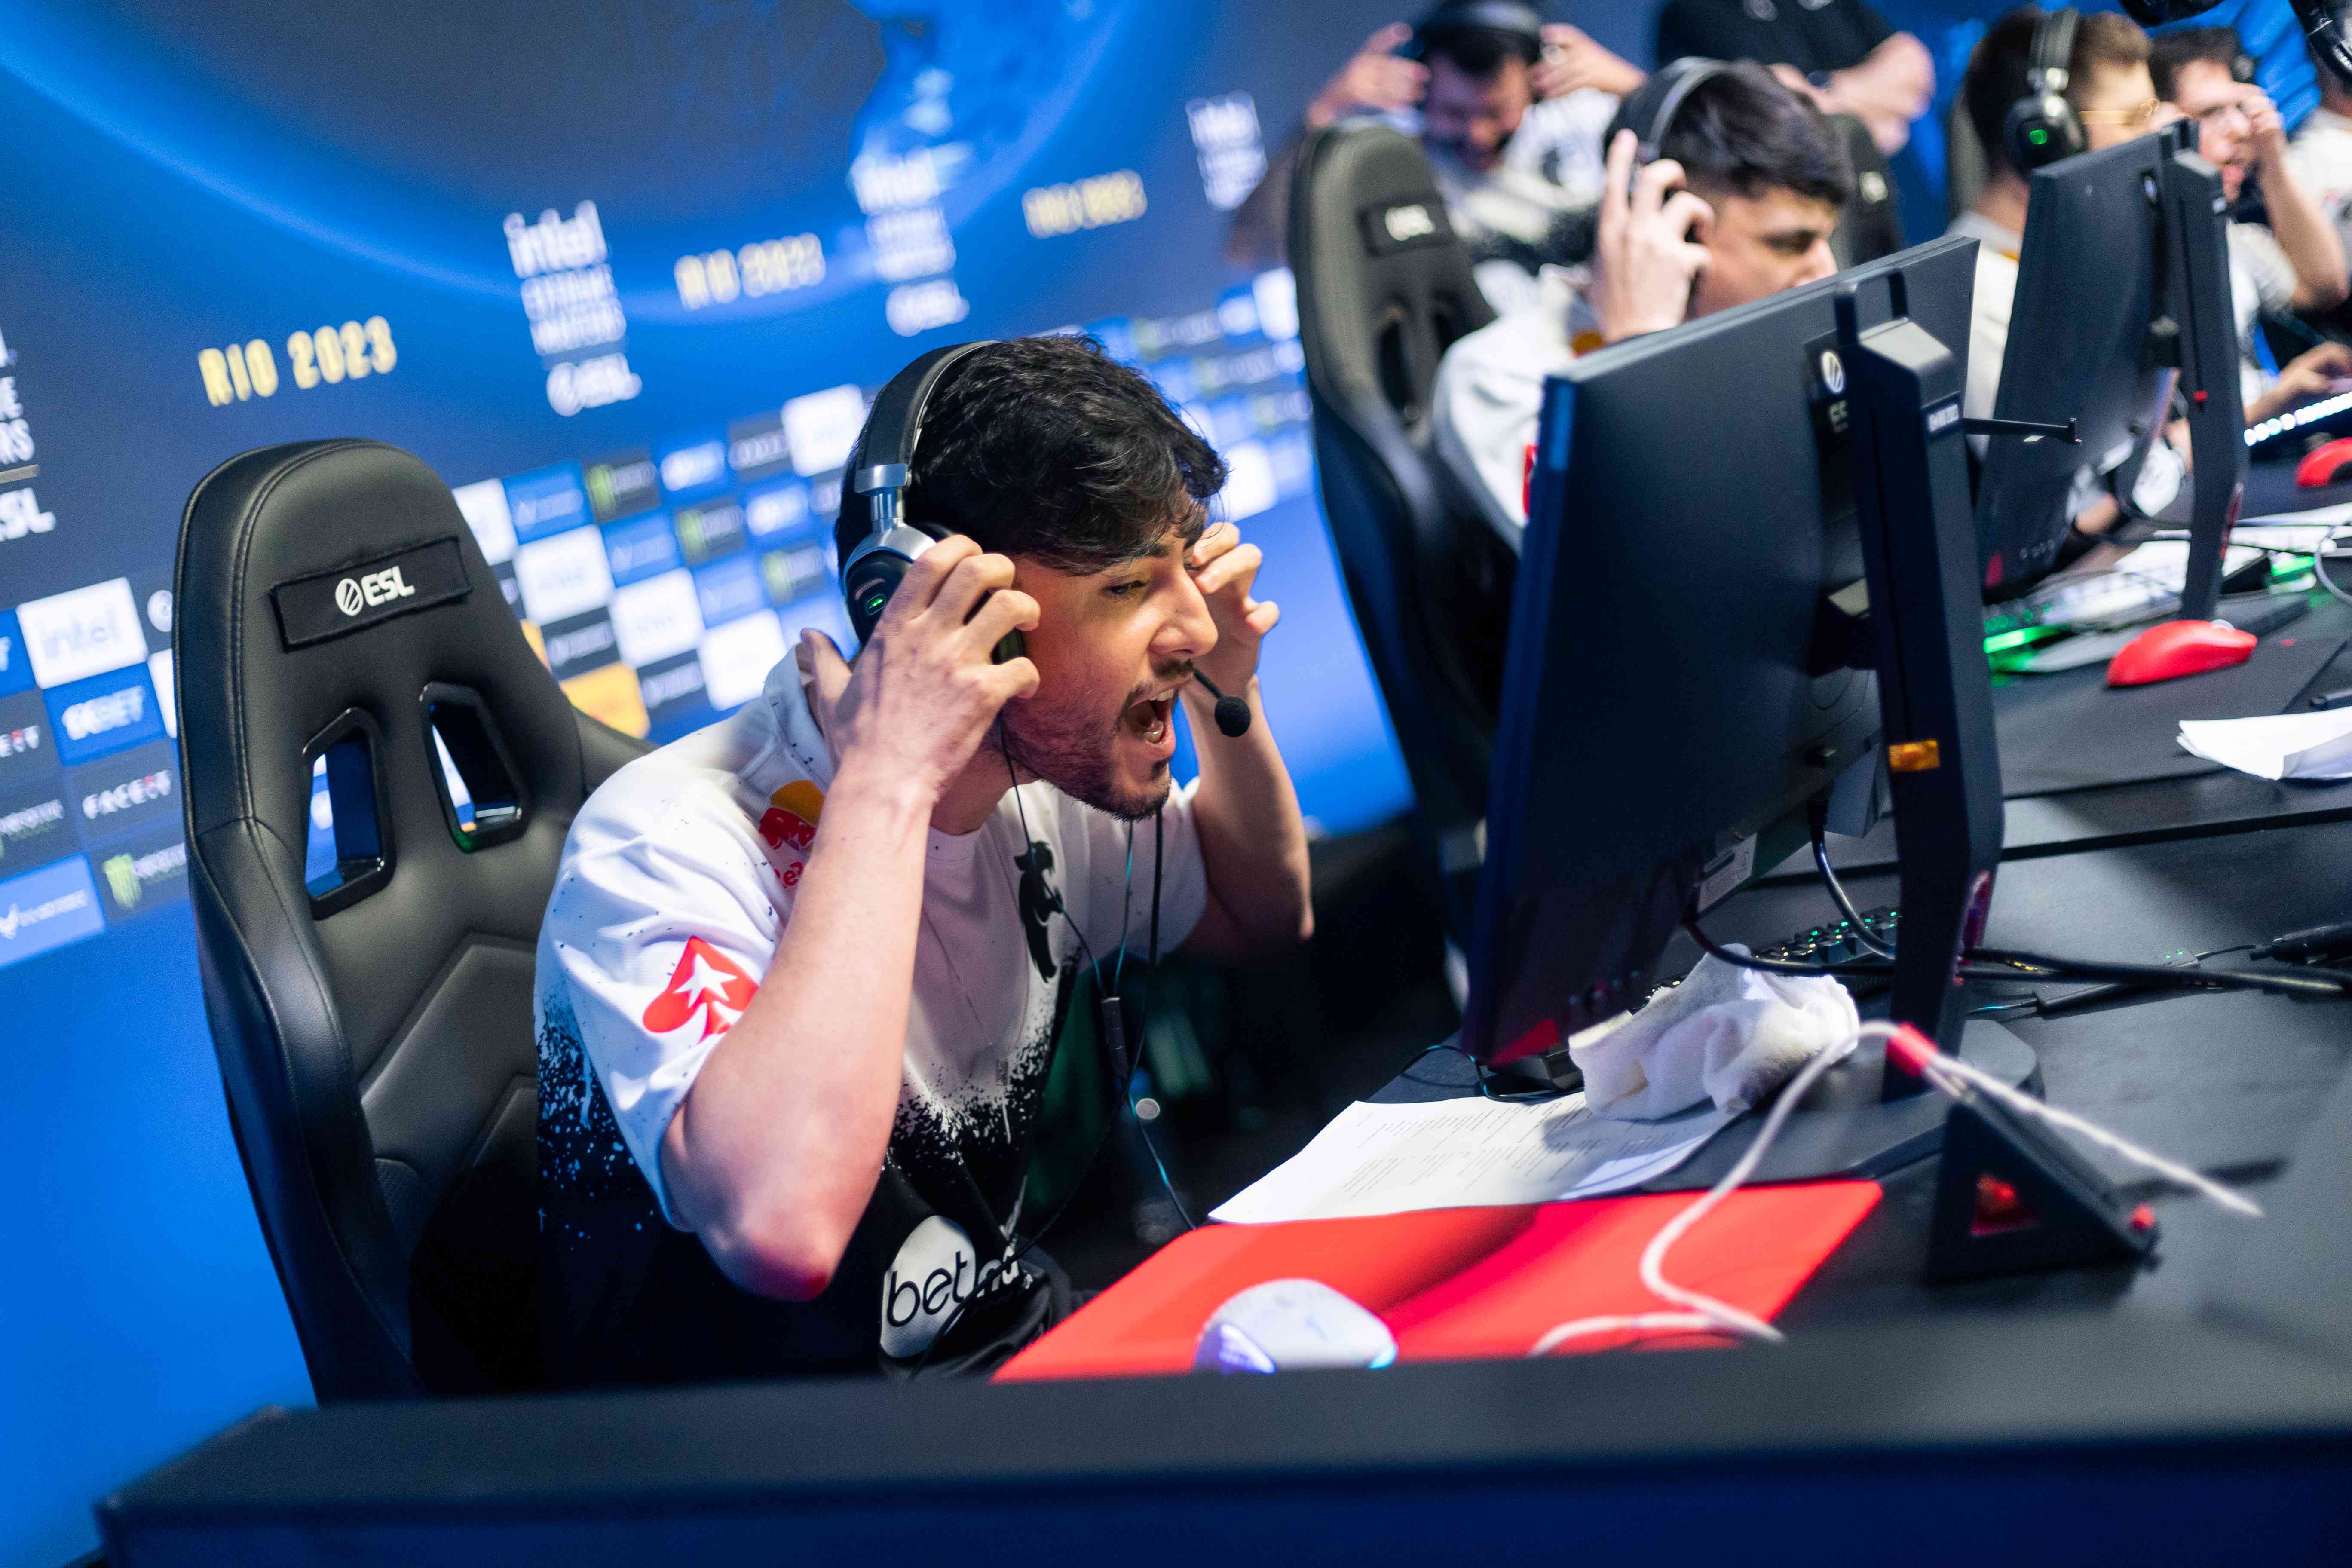 saffee and drop were two of the three lowest-rated players at the BLAST Paris Major, with 0.69 and 0.61 ratings, respectively. (Image Credits ESL | Adela Sznajder)